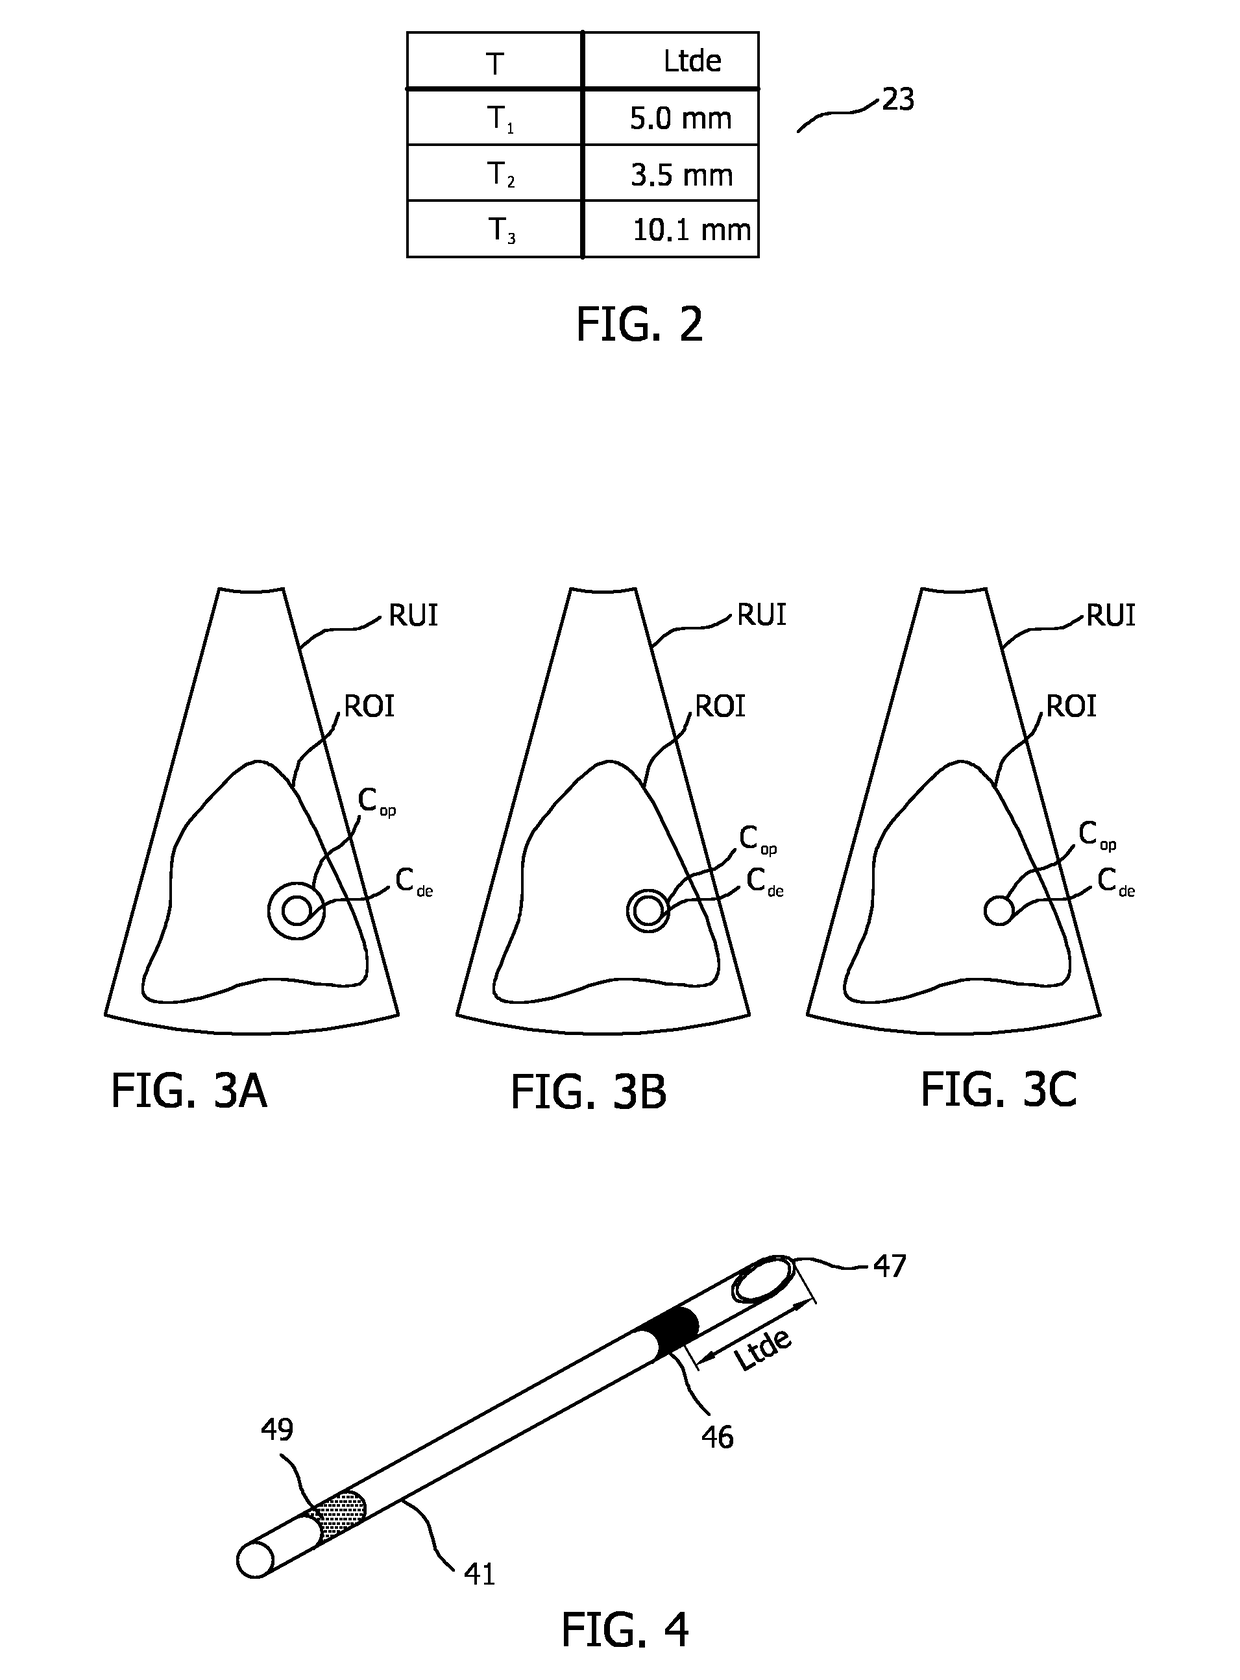 Interventional device recognition